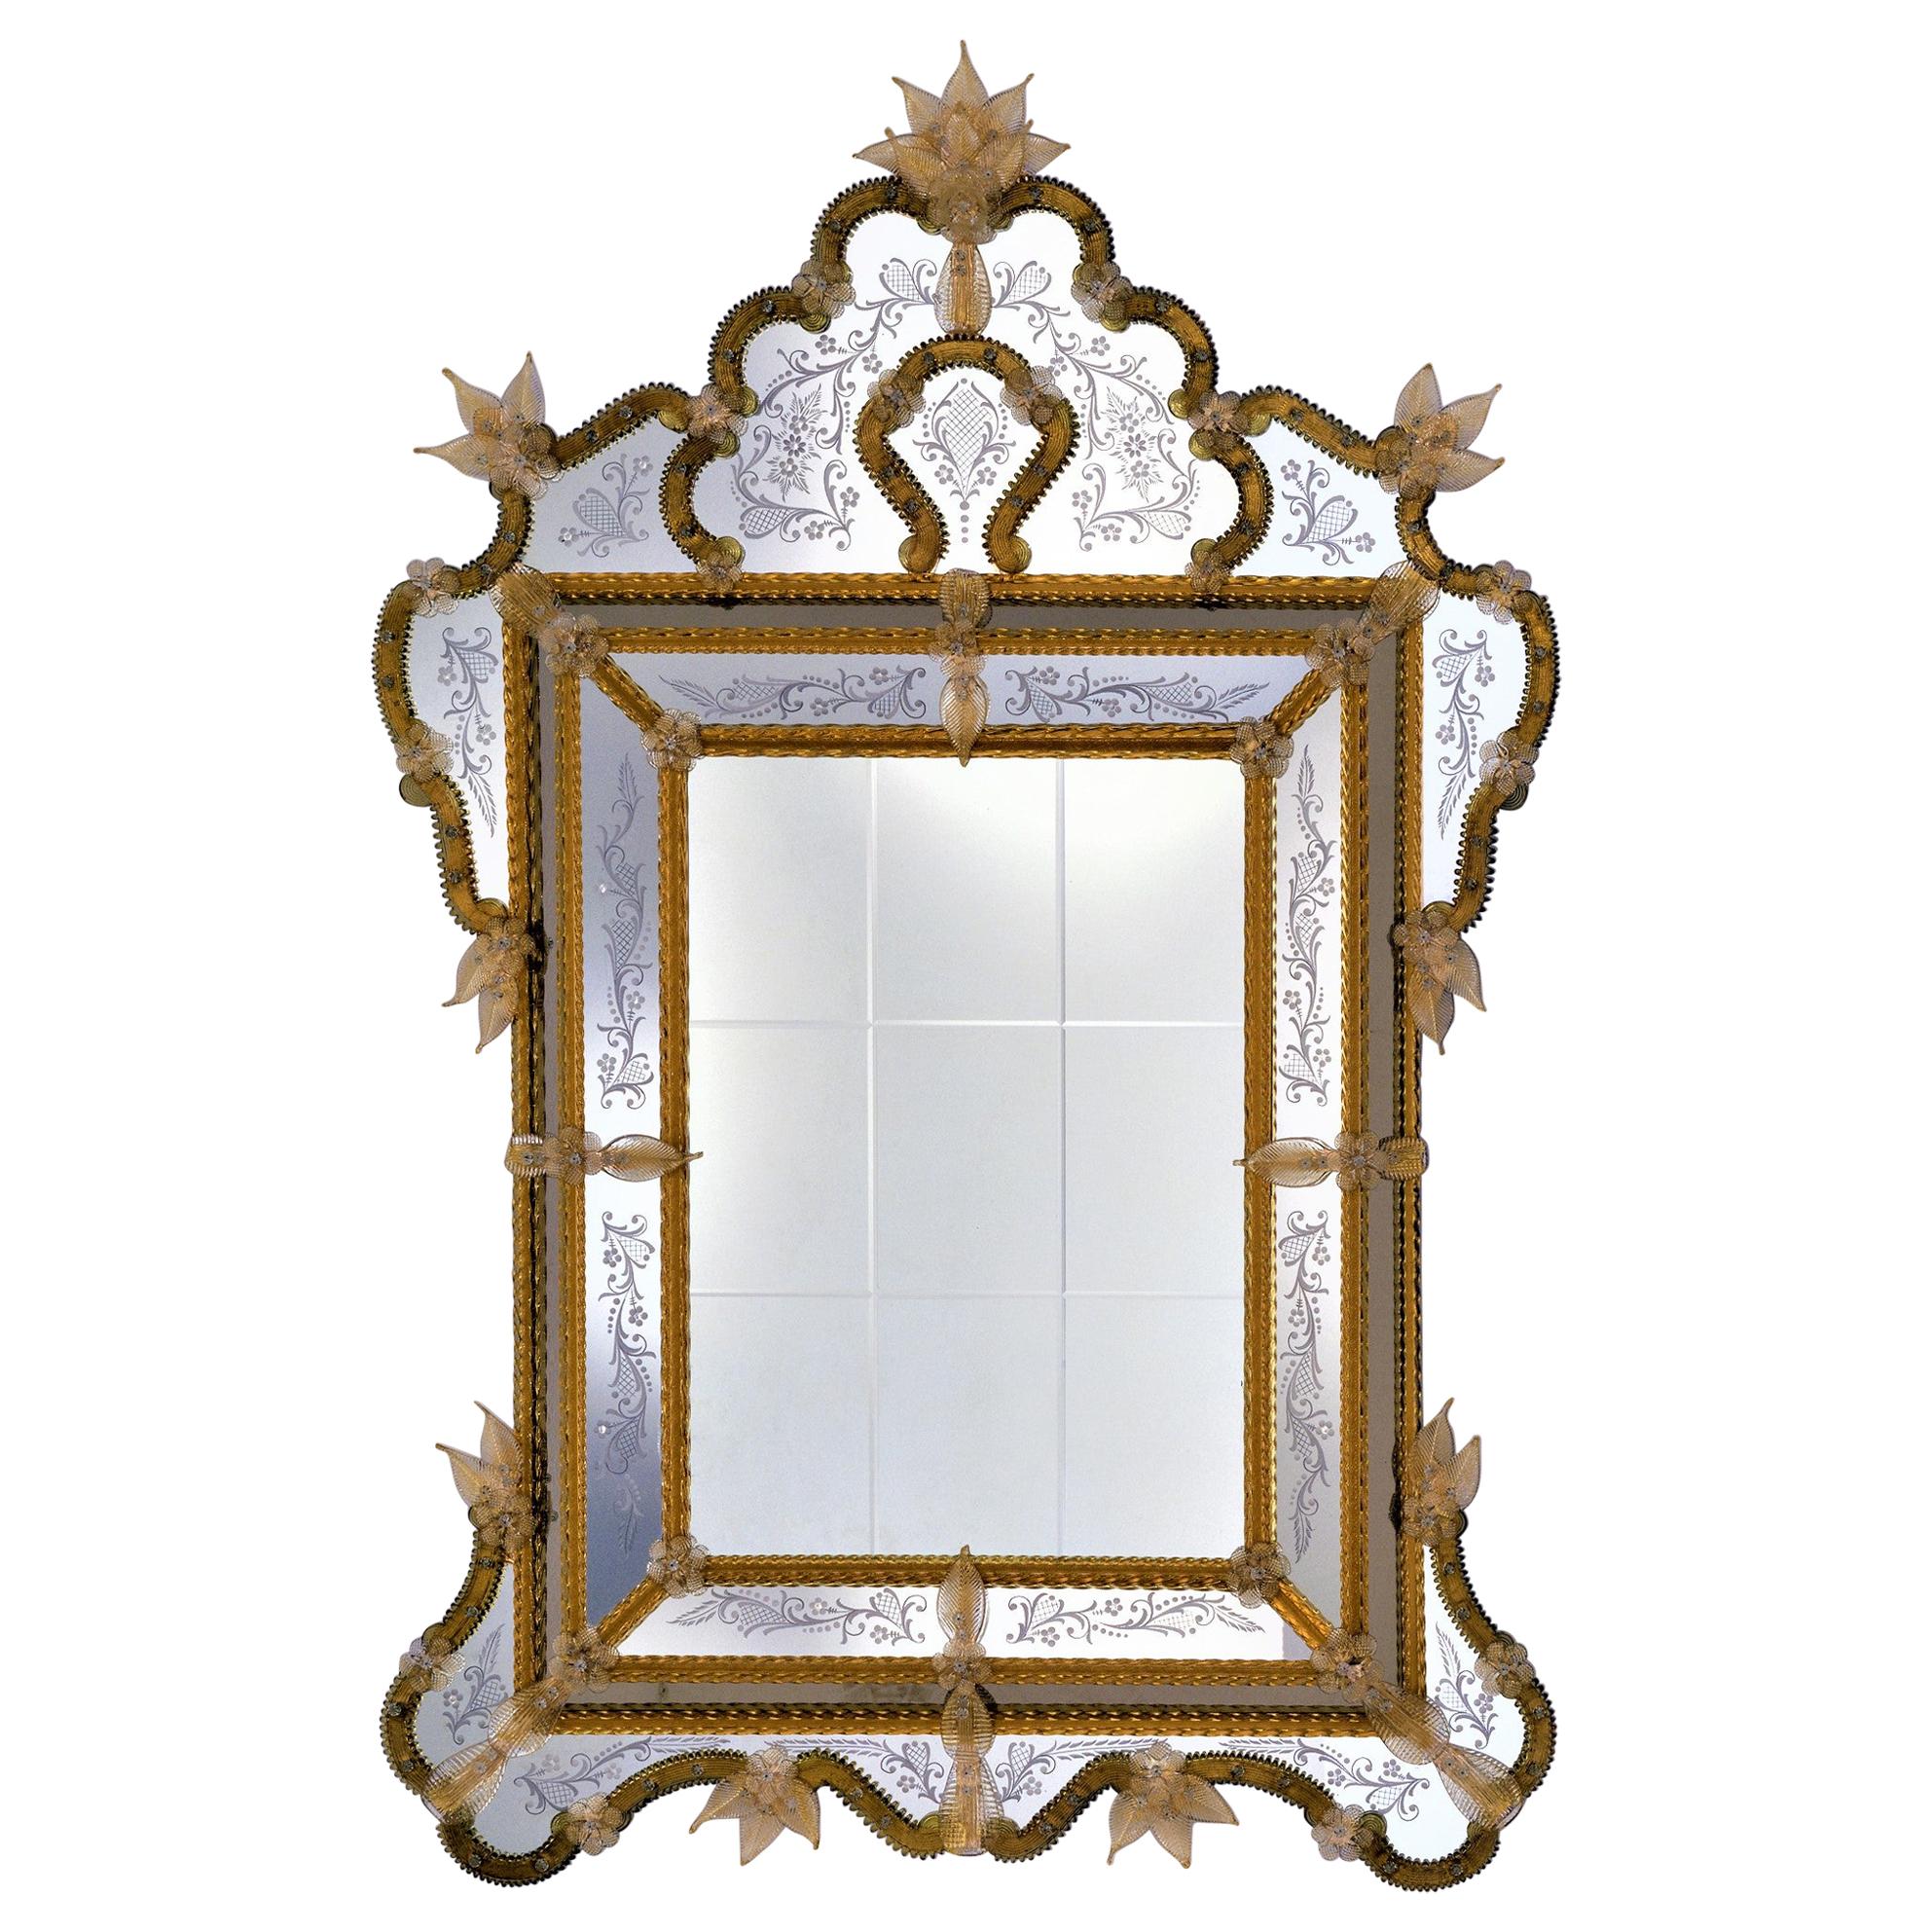 CA'D'ORO, Murano Glass Mirror in Venetian Style by Fratelli Tosi, Made in Italy